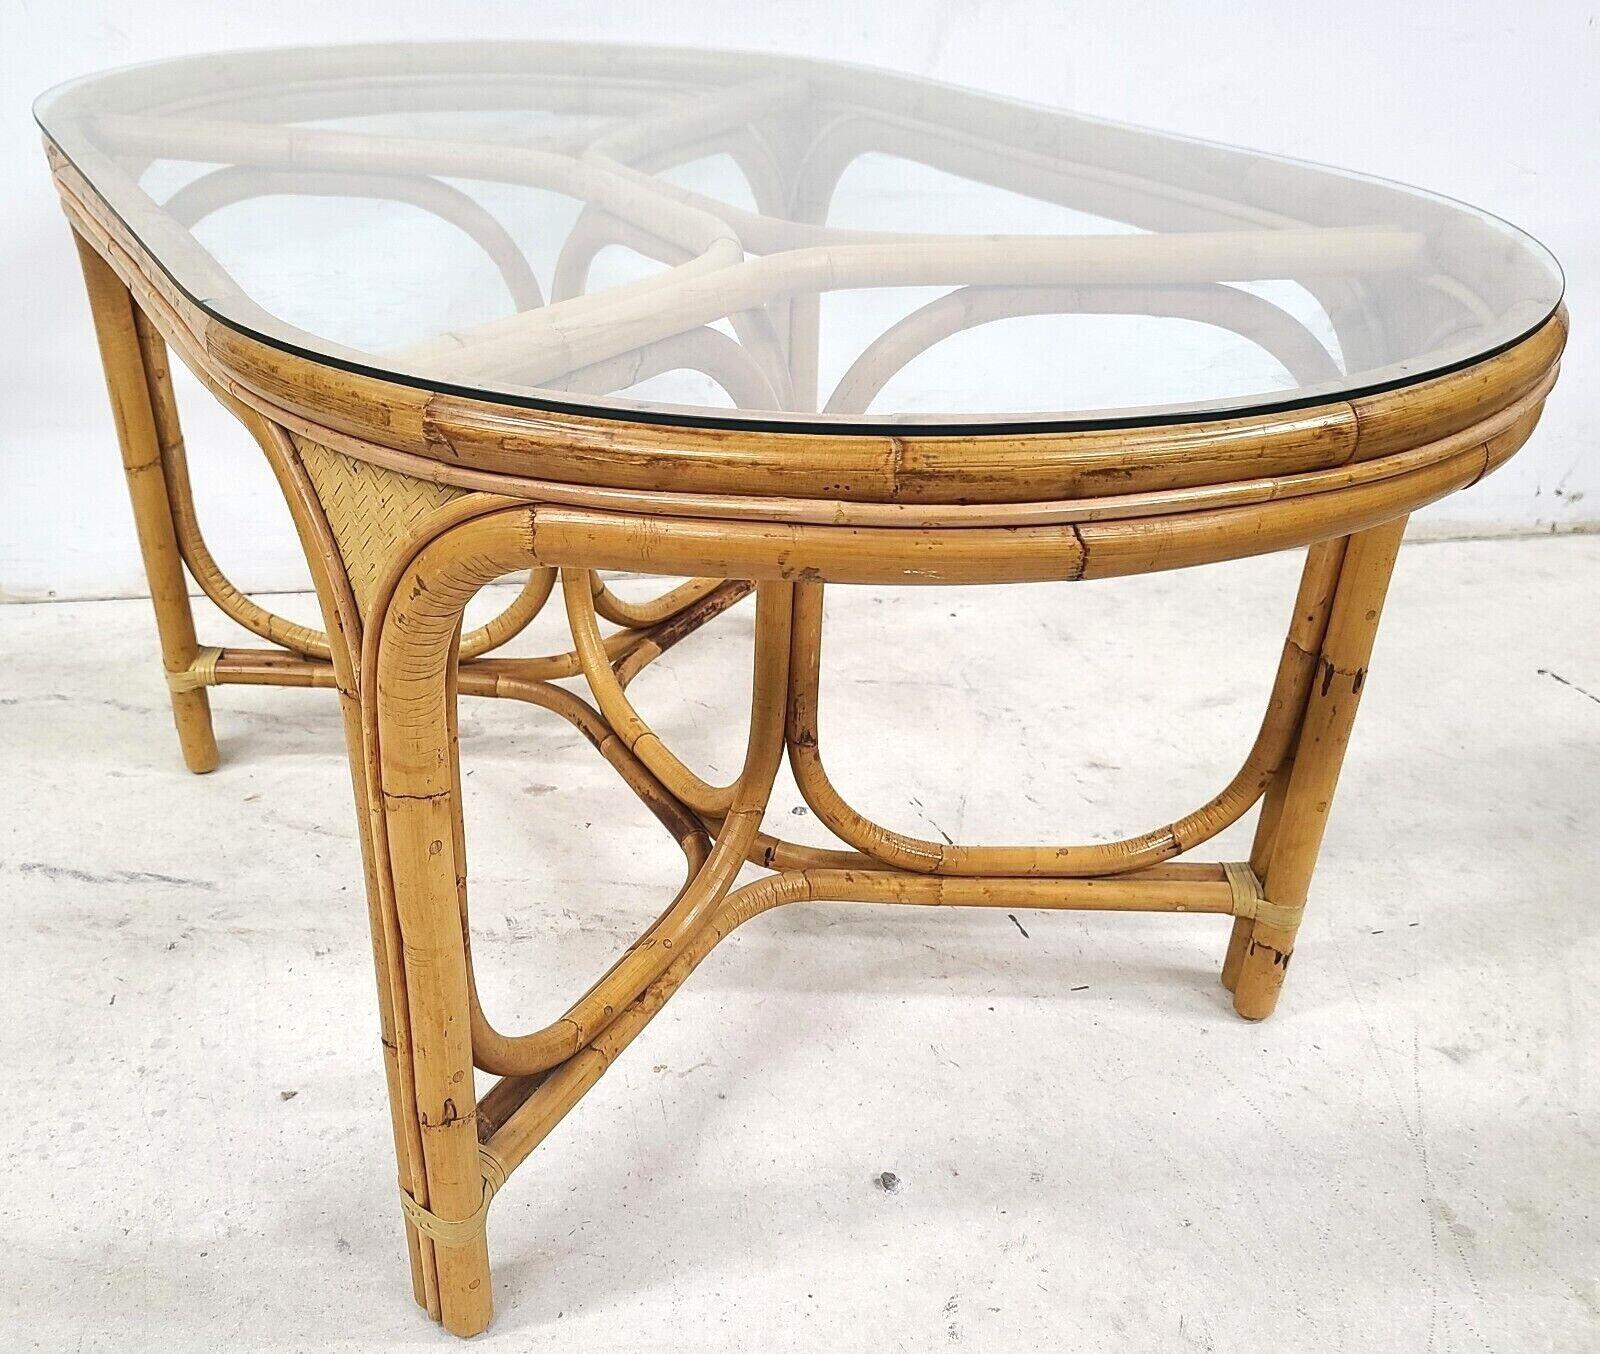 Offering one of our recent palm beach estate fine furniture acquisitions of a
Vintage 1970s bamboo rattan glass oval dining table

Extremely well-built and solid.

Approximate measurements in inches
60